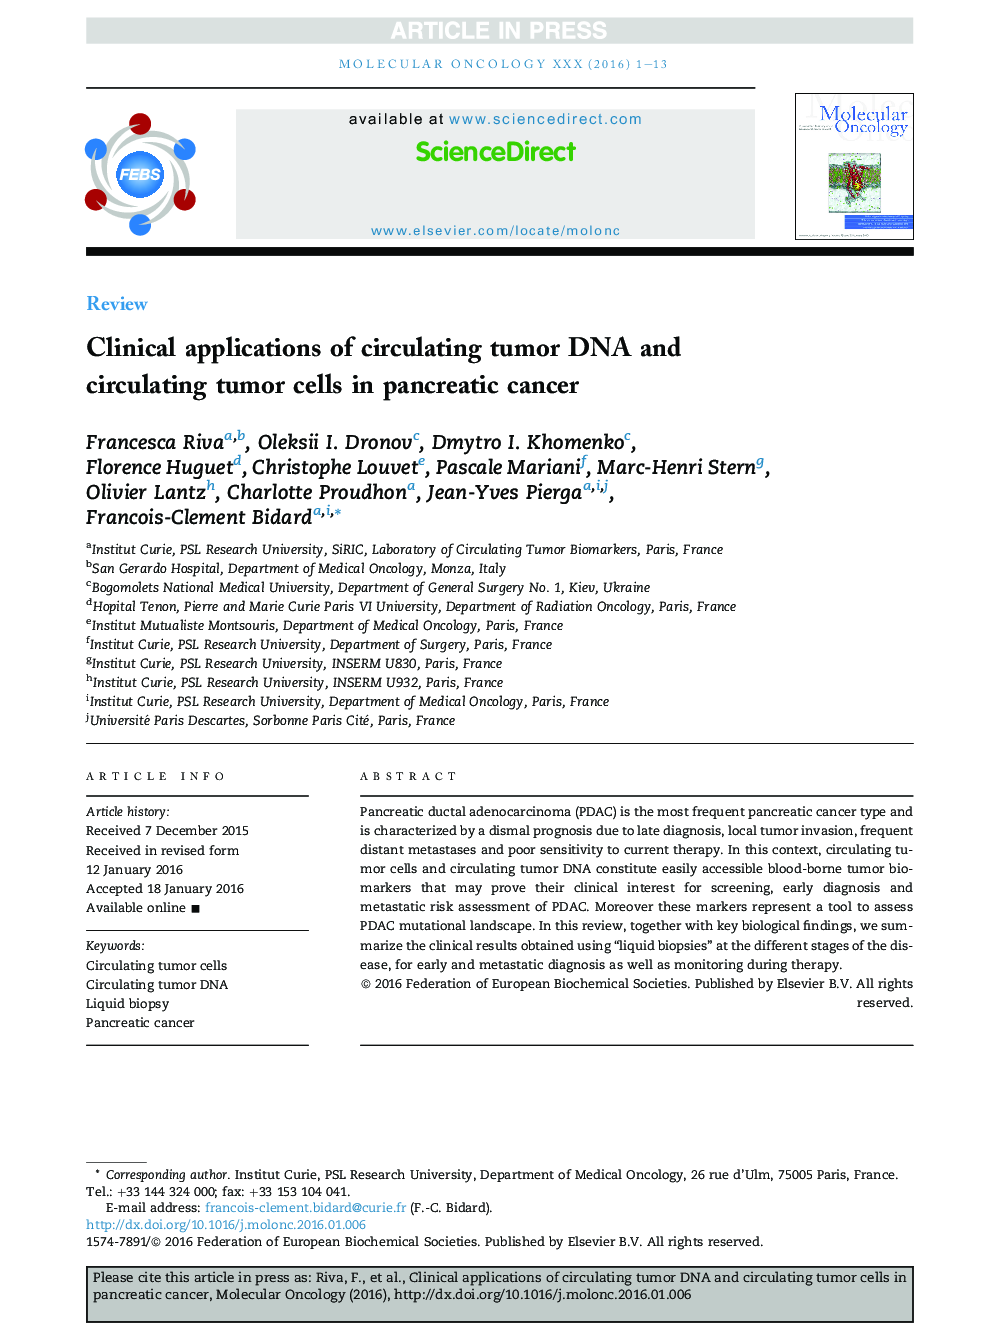 Clinical applications of circulating tumor DNA and circulating tumor cells in pancreatic cancer